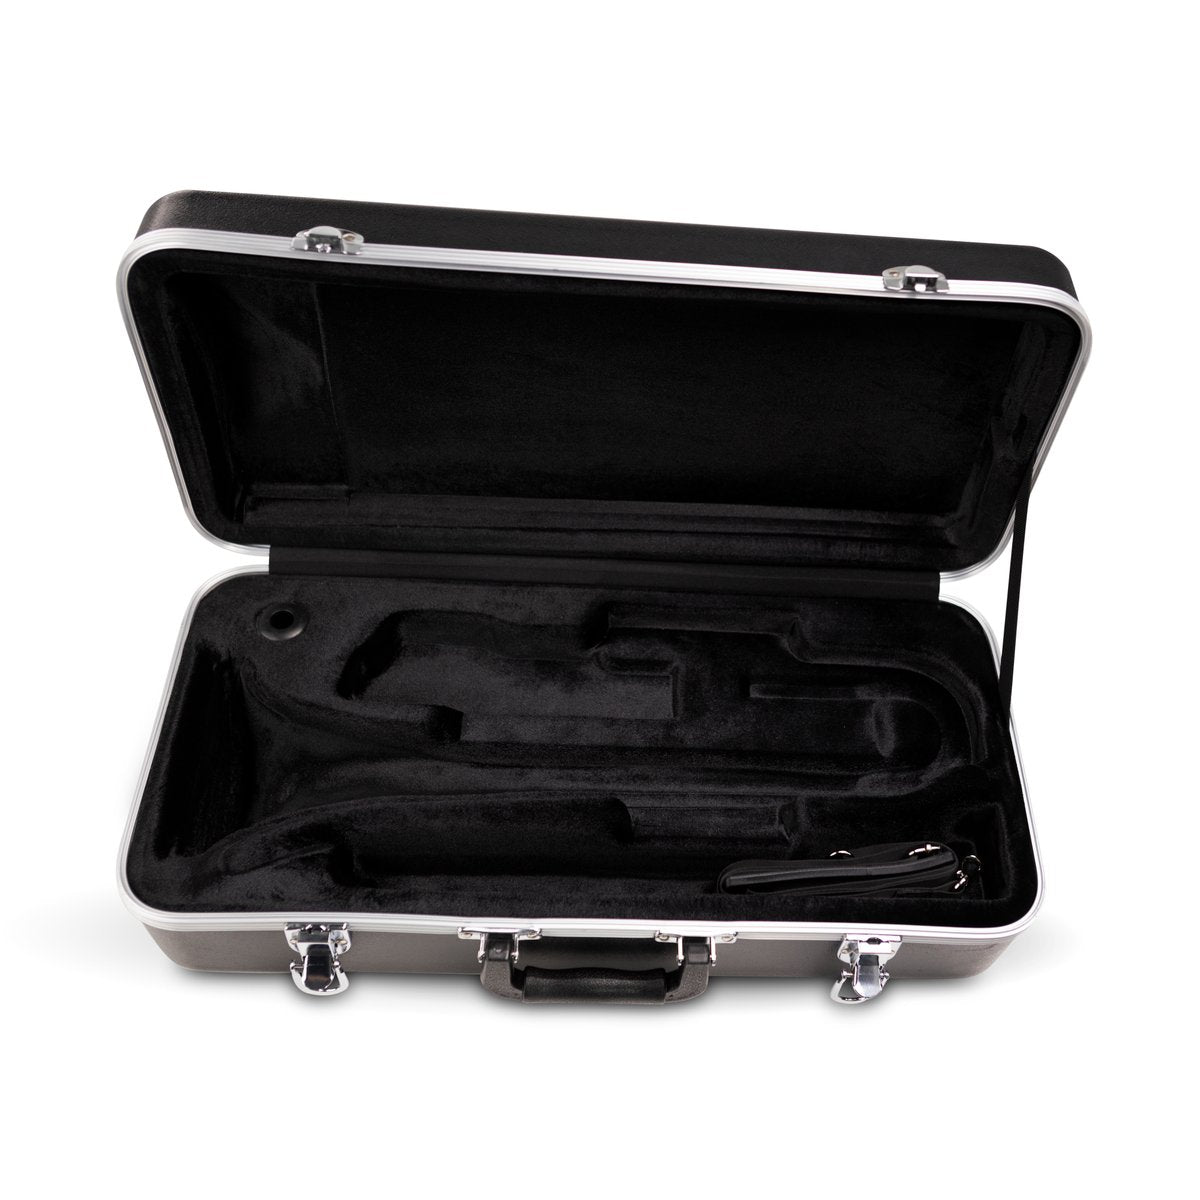 Gator ABS Hardshell Case for Bb Trumpet GCTRUMPET23-Andy's Music